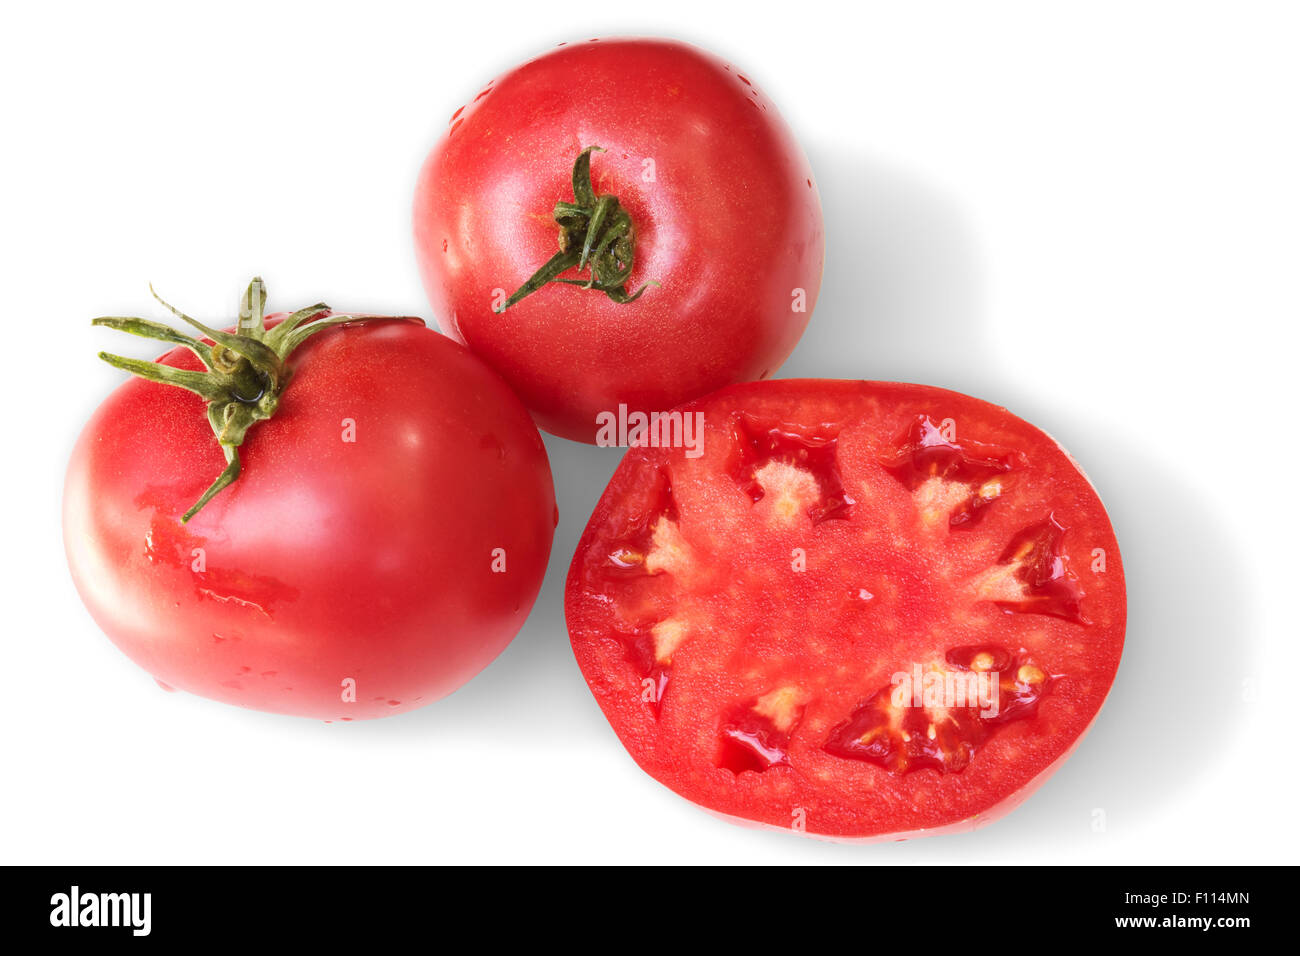 Red tomatoes Stock Photo